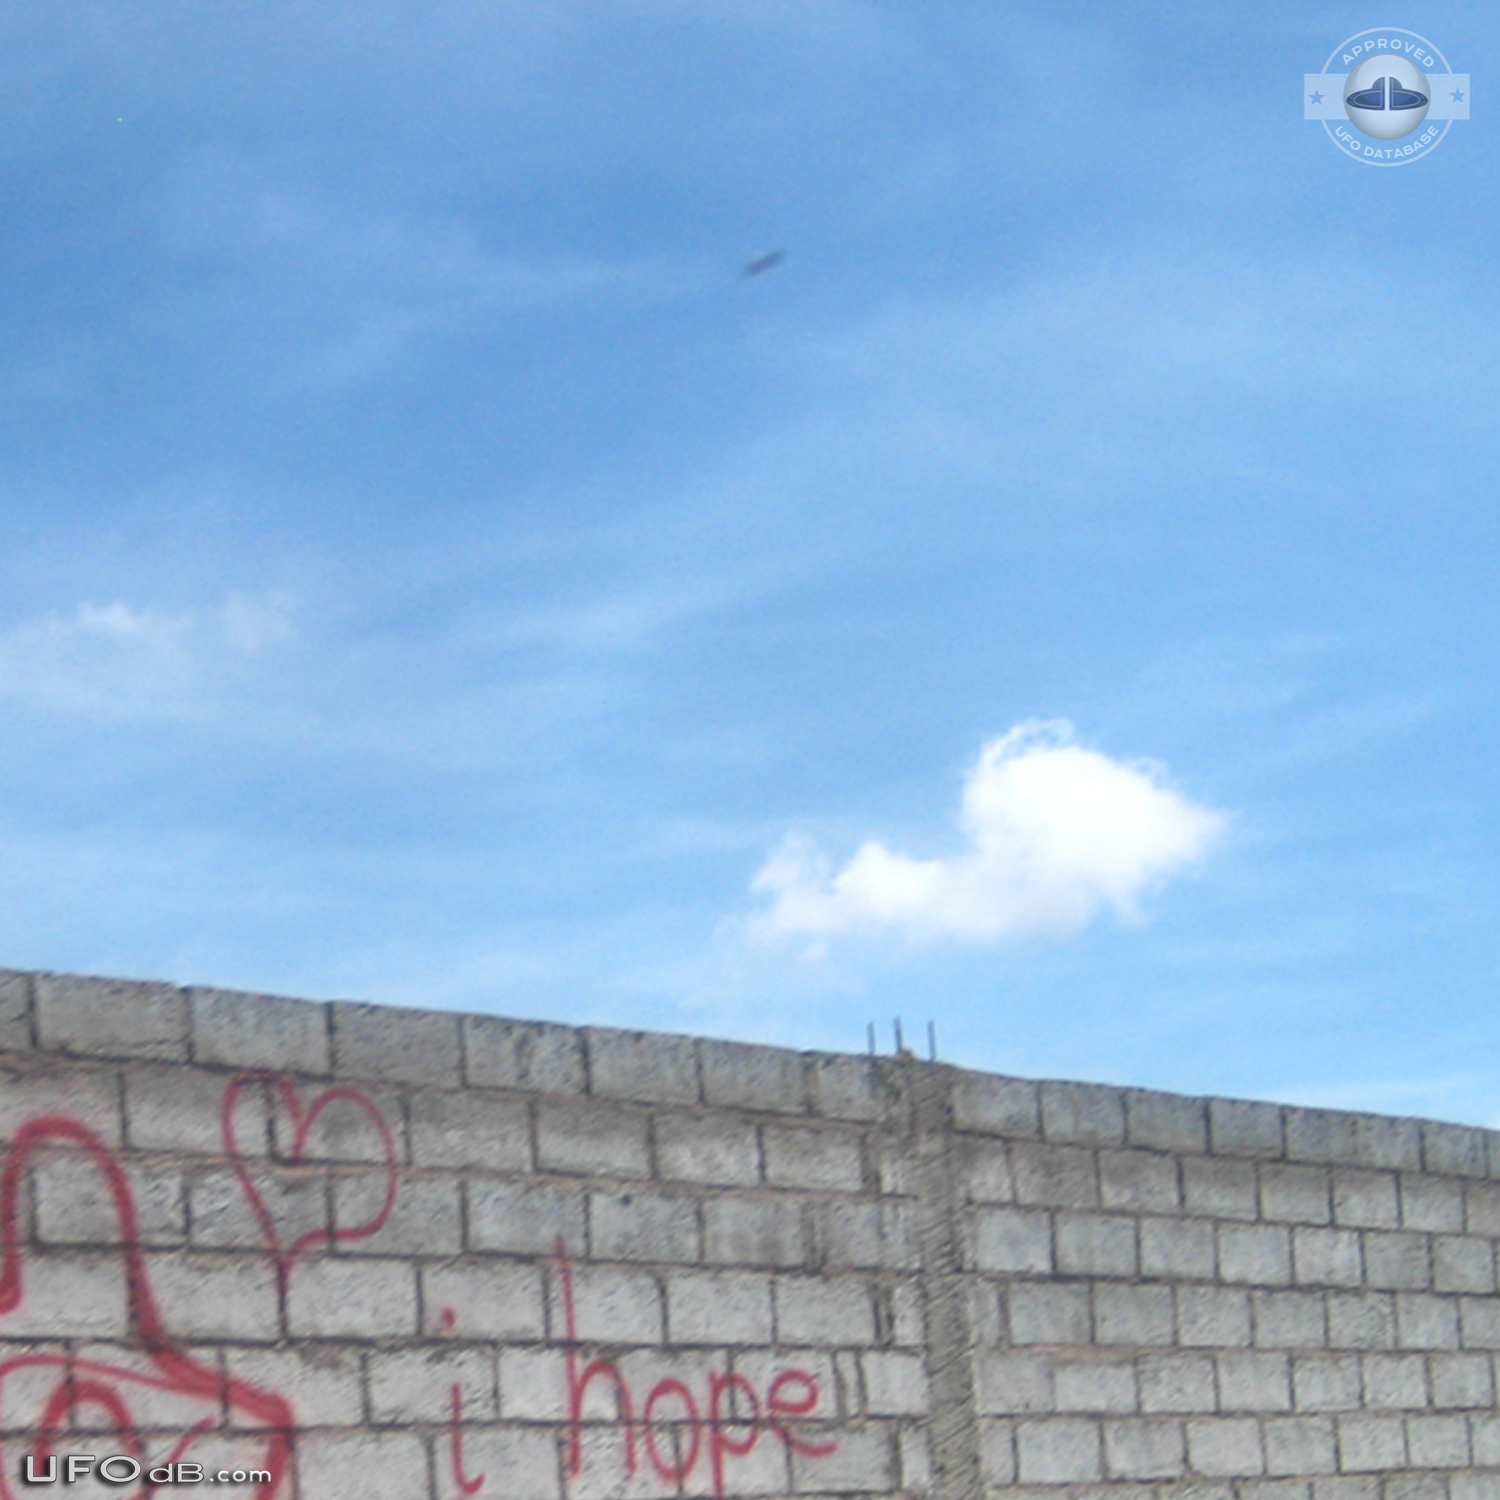 Picture of Graffiti on wall captures UFO in the sky in Cumbaya Ecuador UFO Picture #552-3